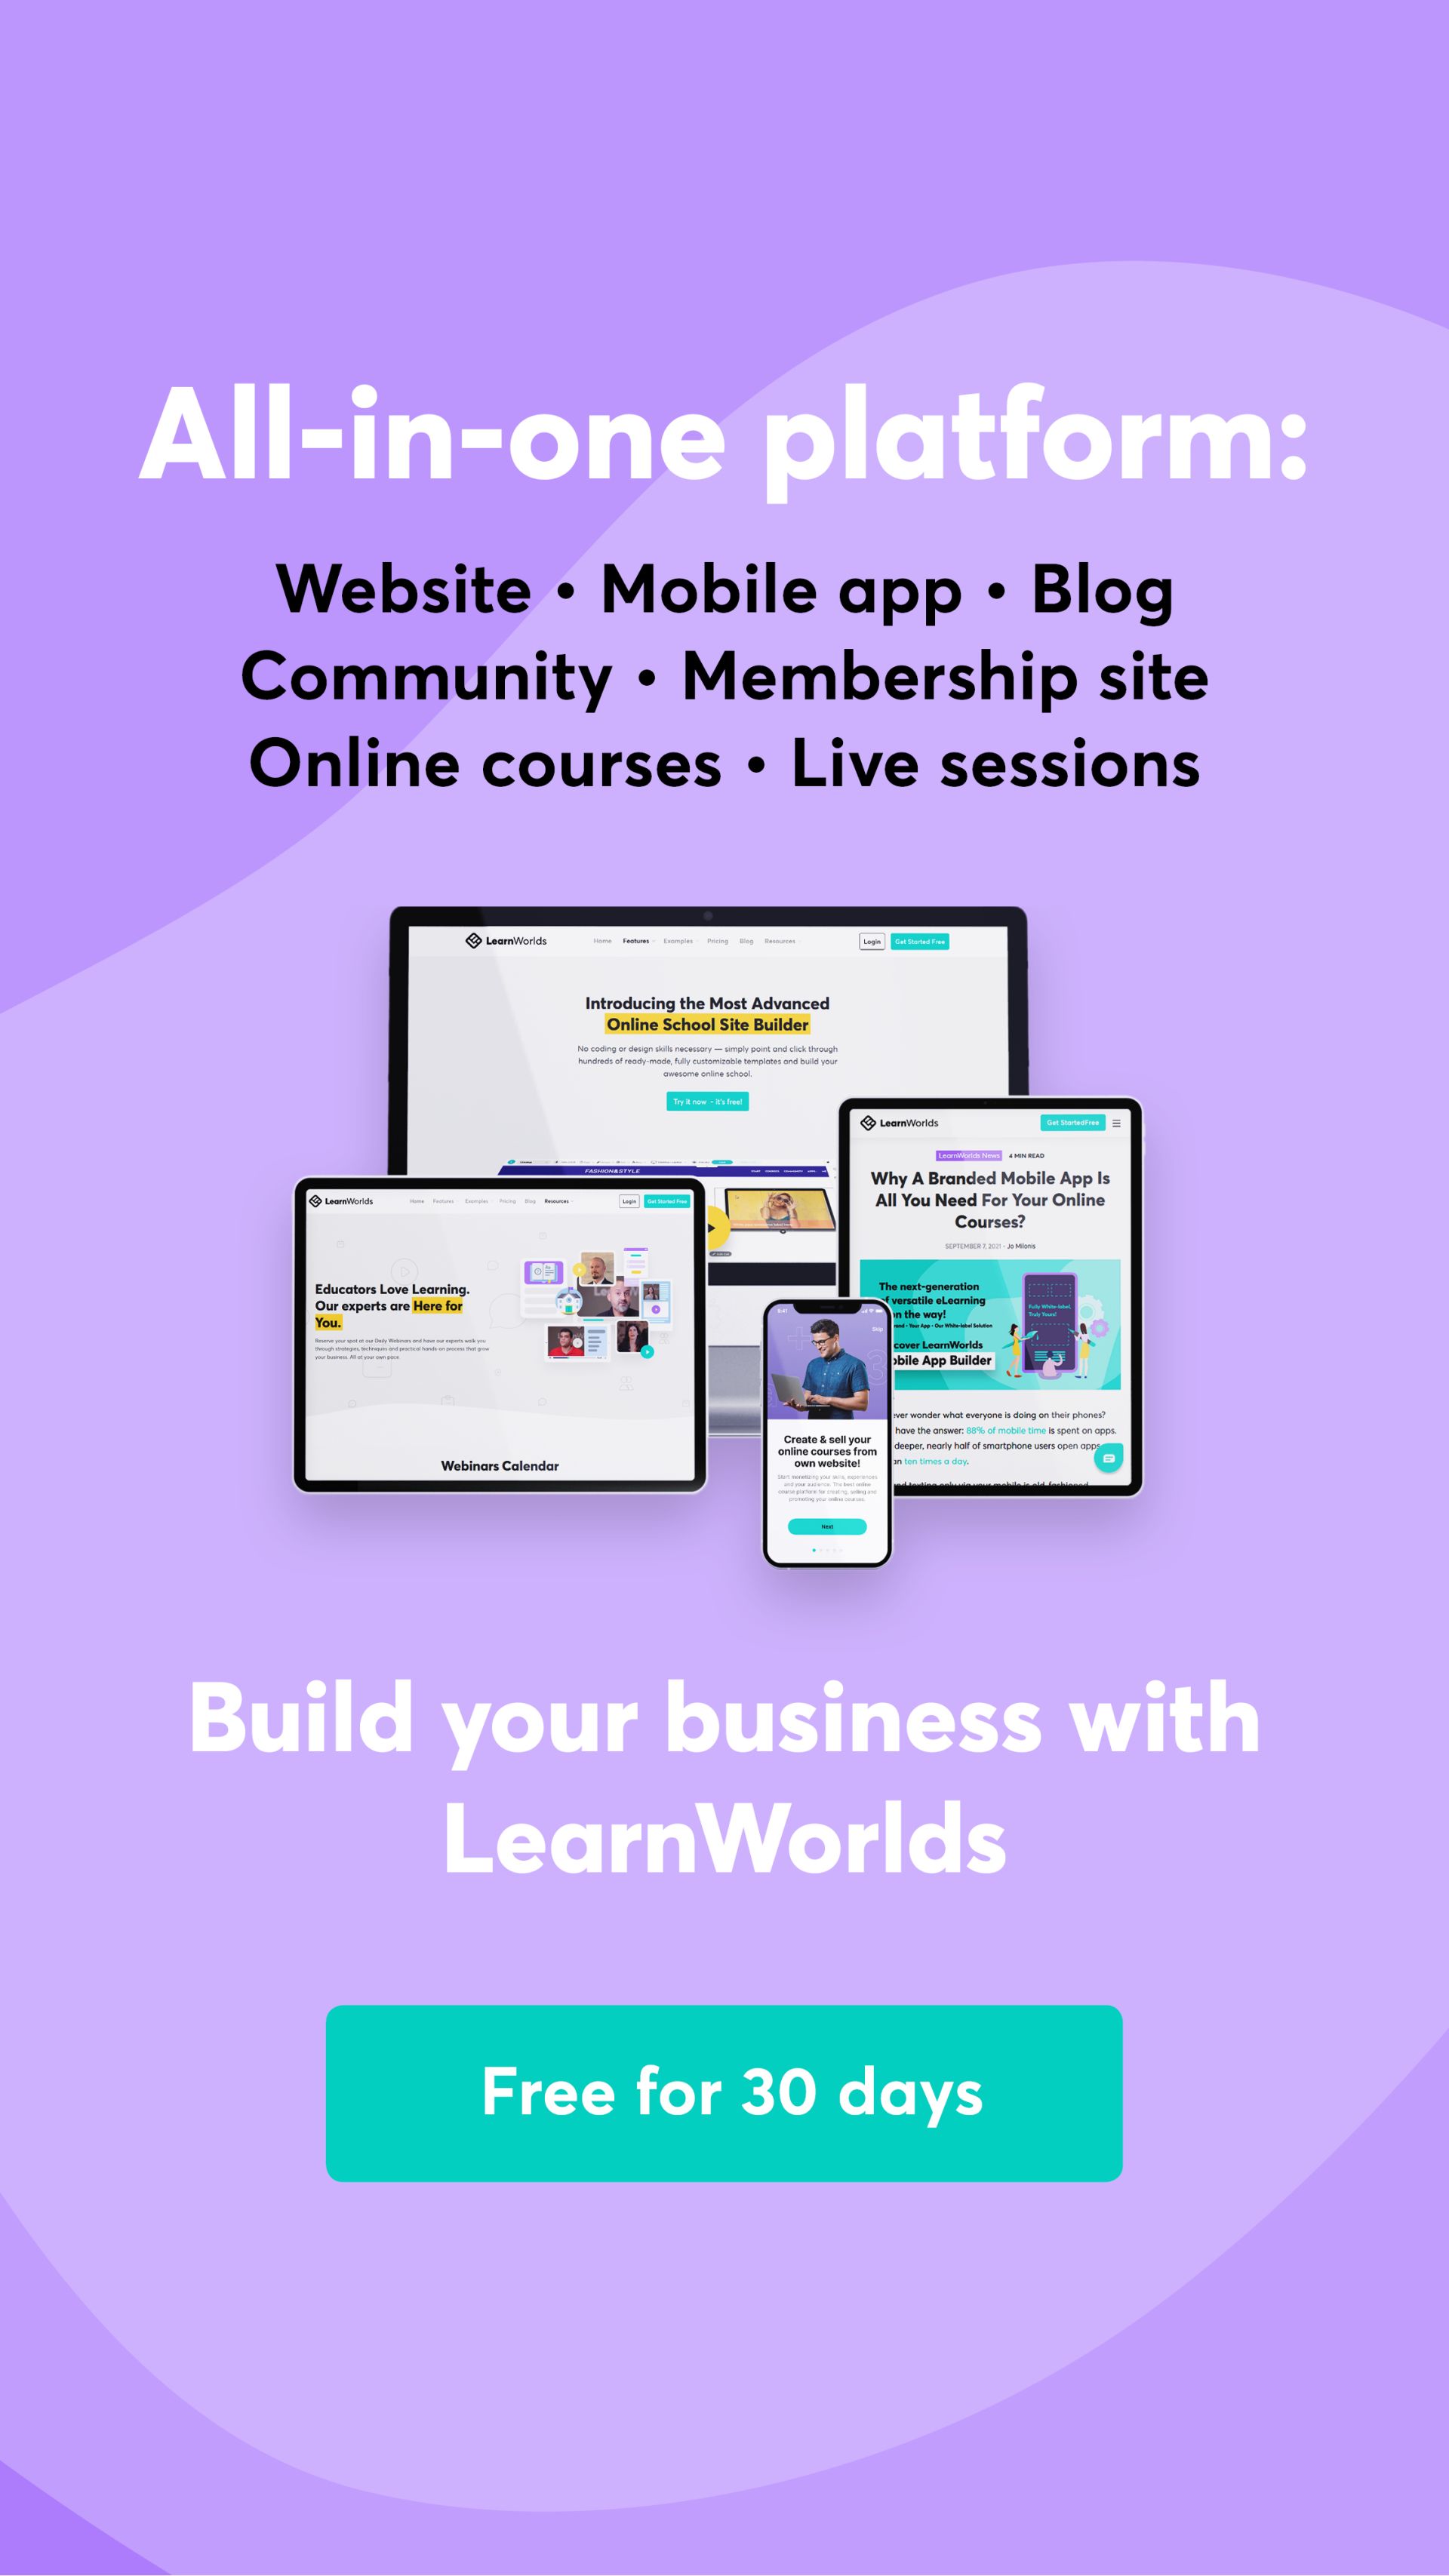 Learnworlds is a great solution for your online business needs.